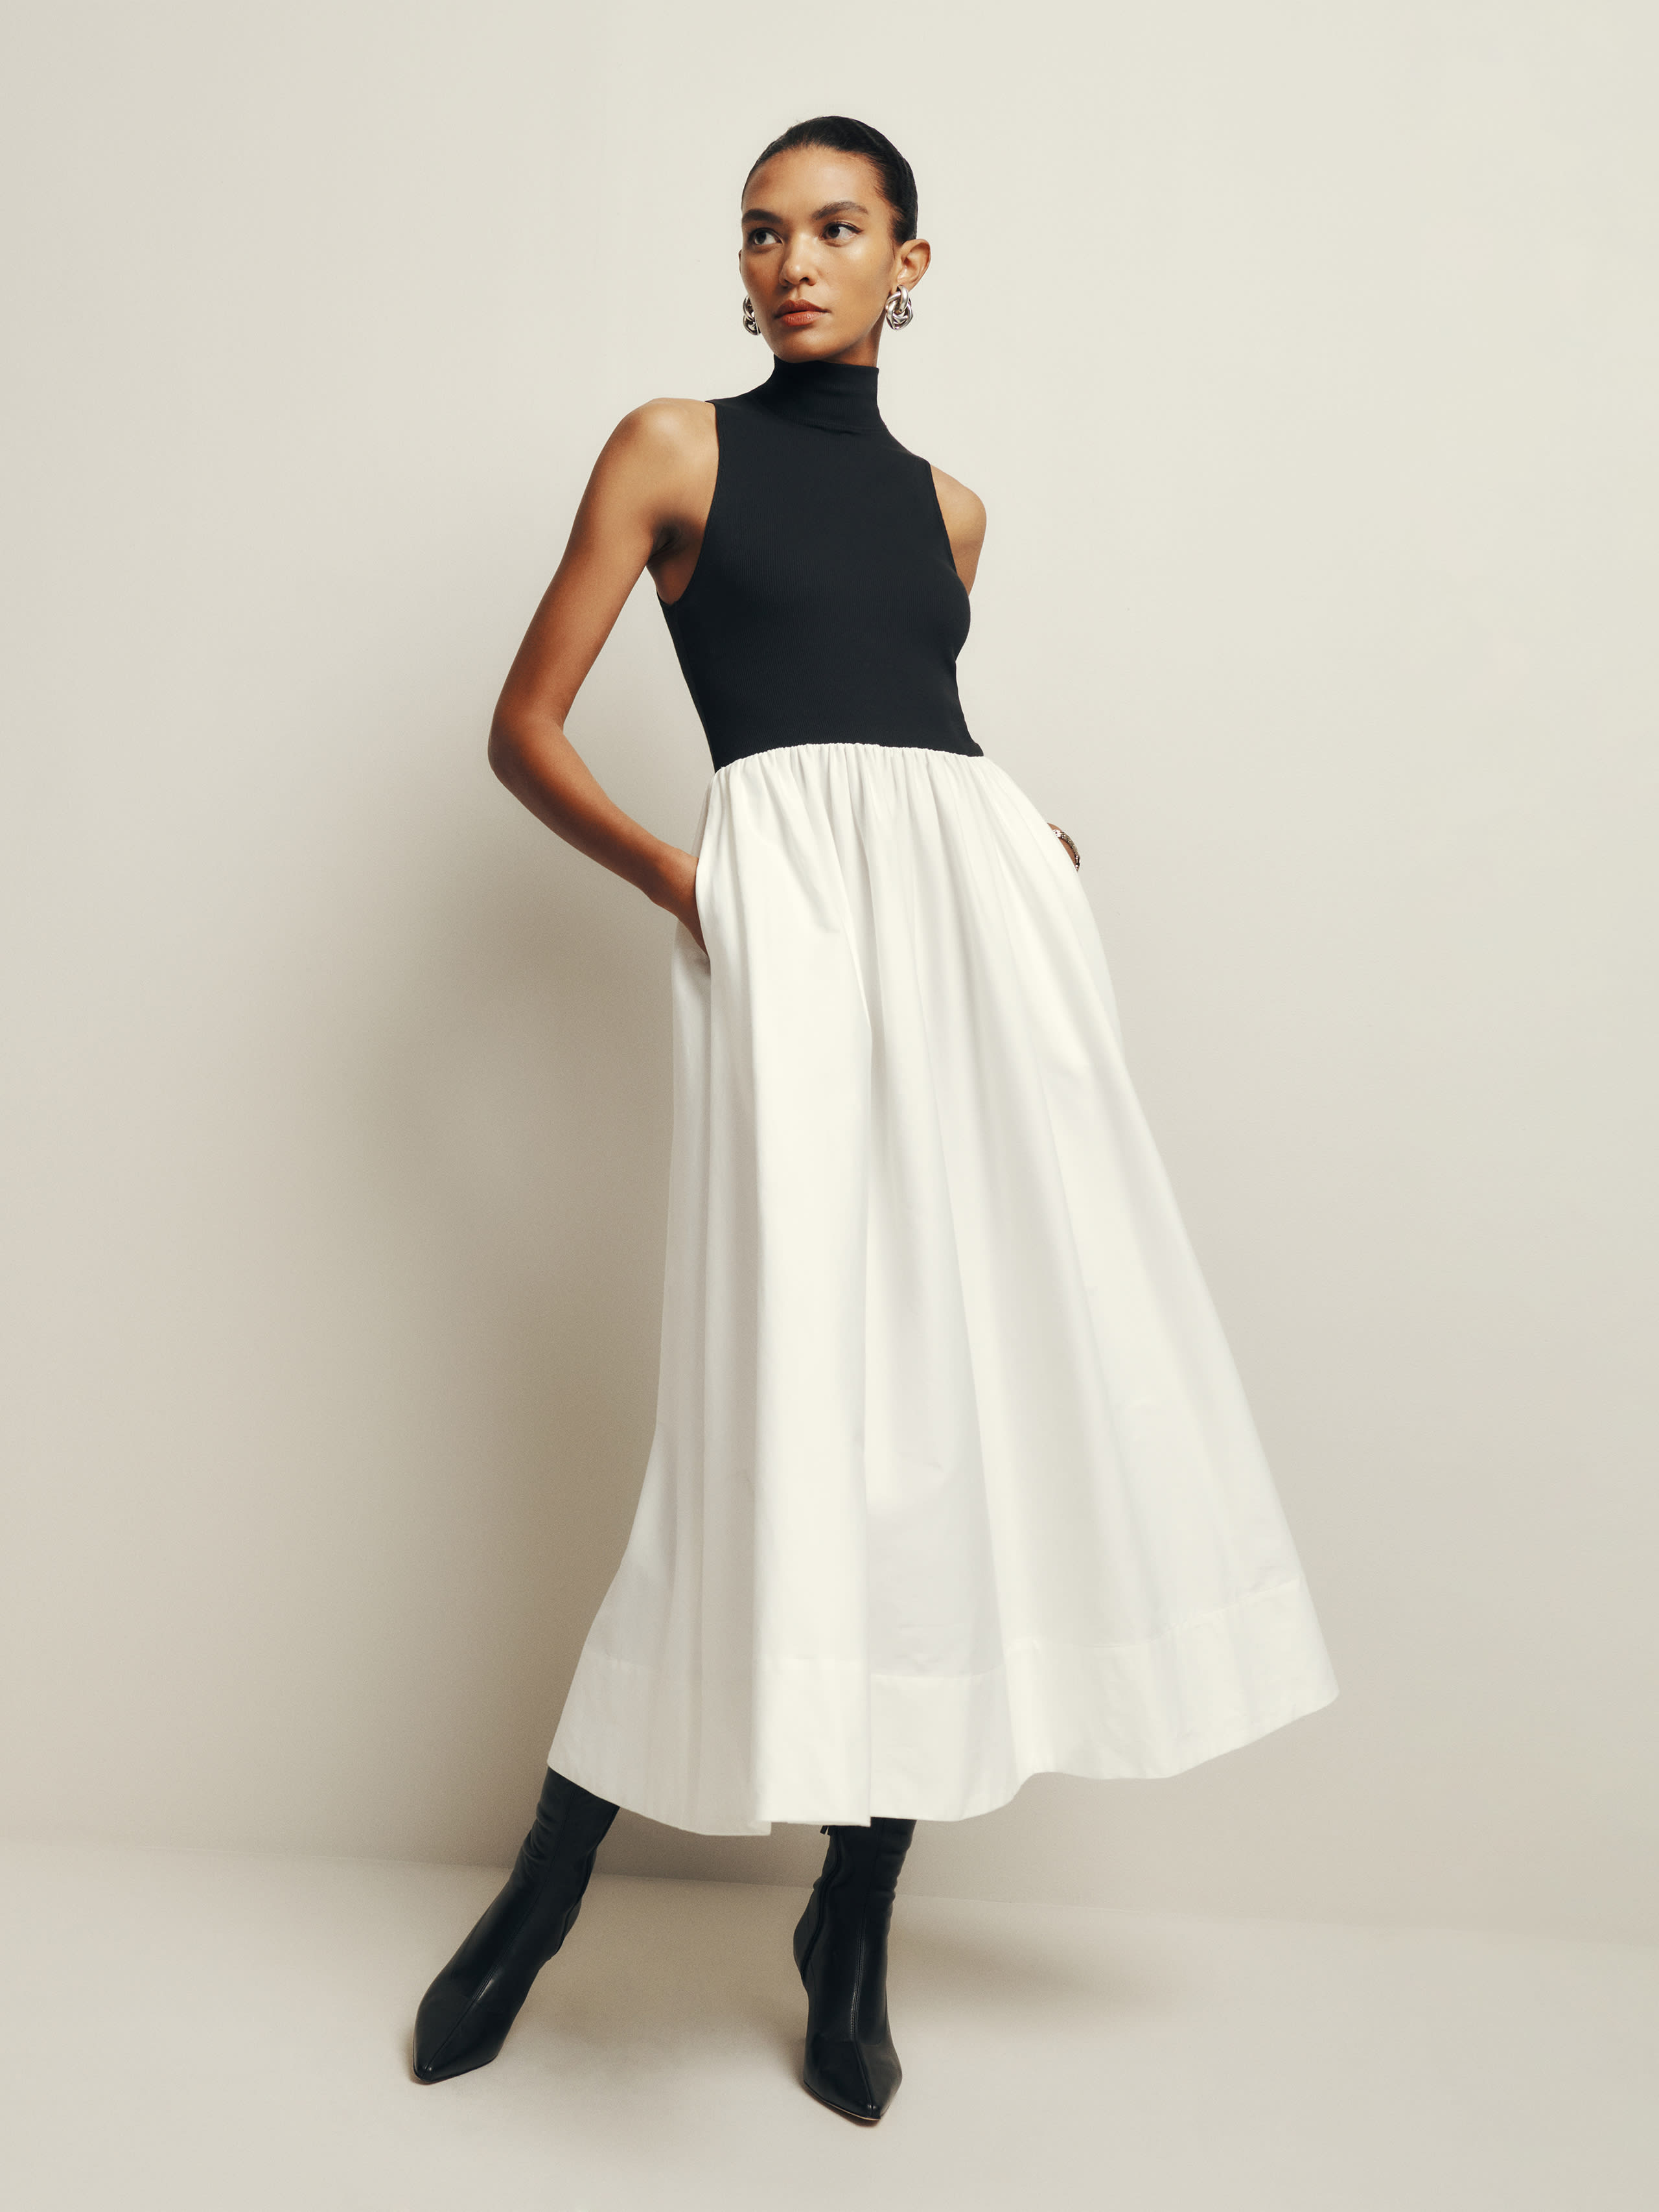 Reformation Petites Sai Dress In Black And White